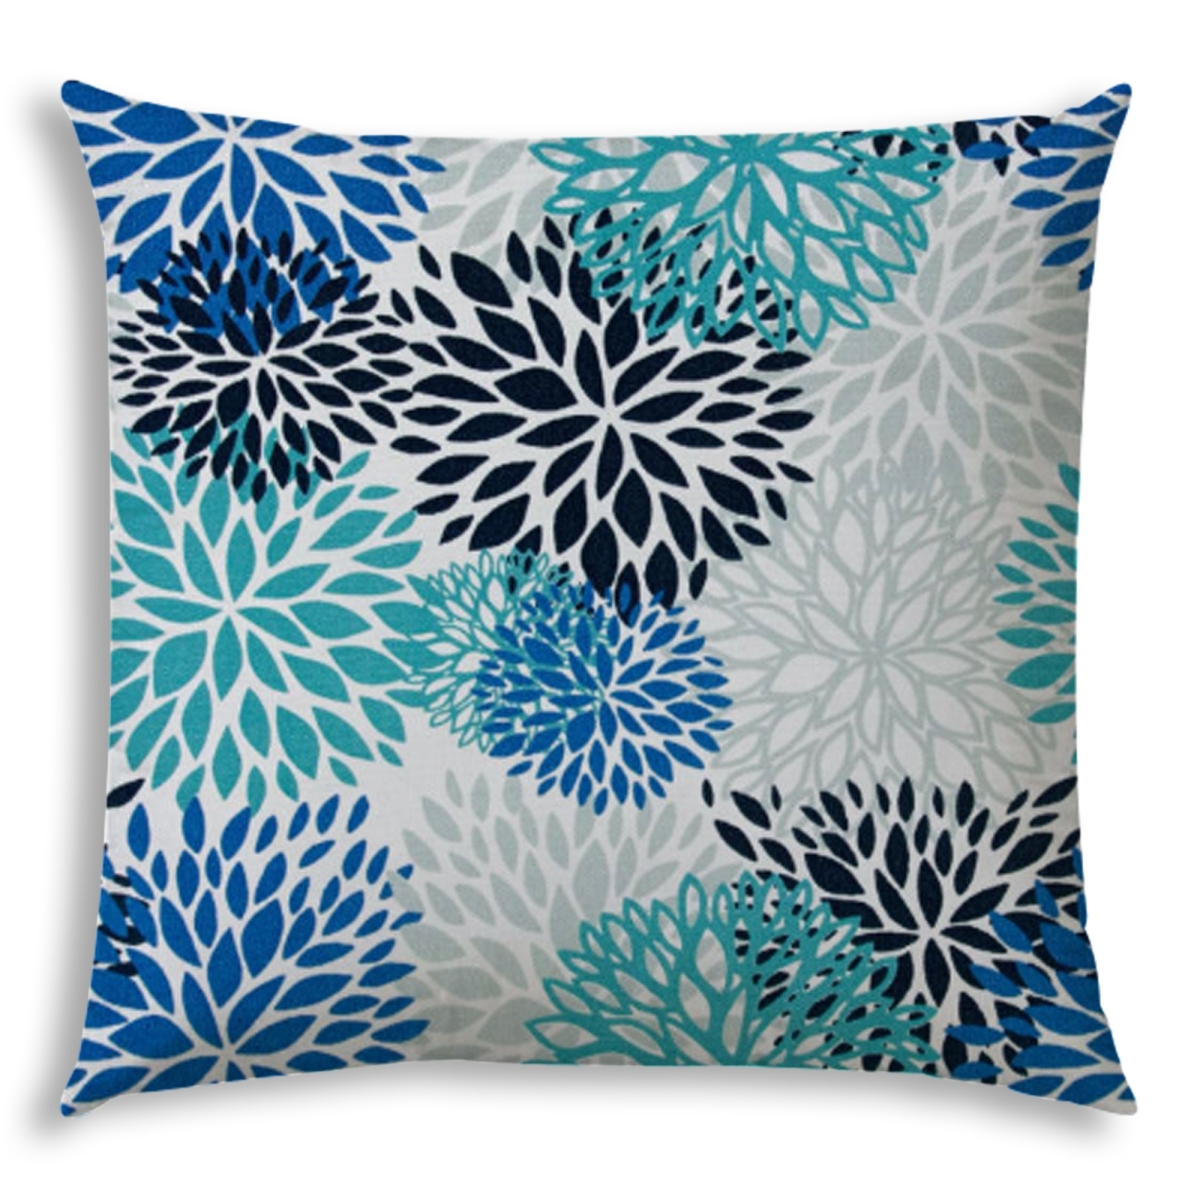 Picture of HomeRoots 472650 20 x 20 in. Blue Seafoam & White Zippered Polyester Floral Throw Pillow Cover